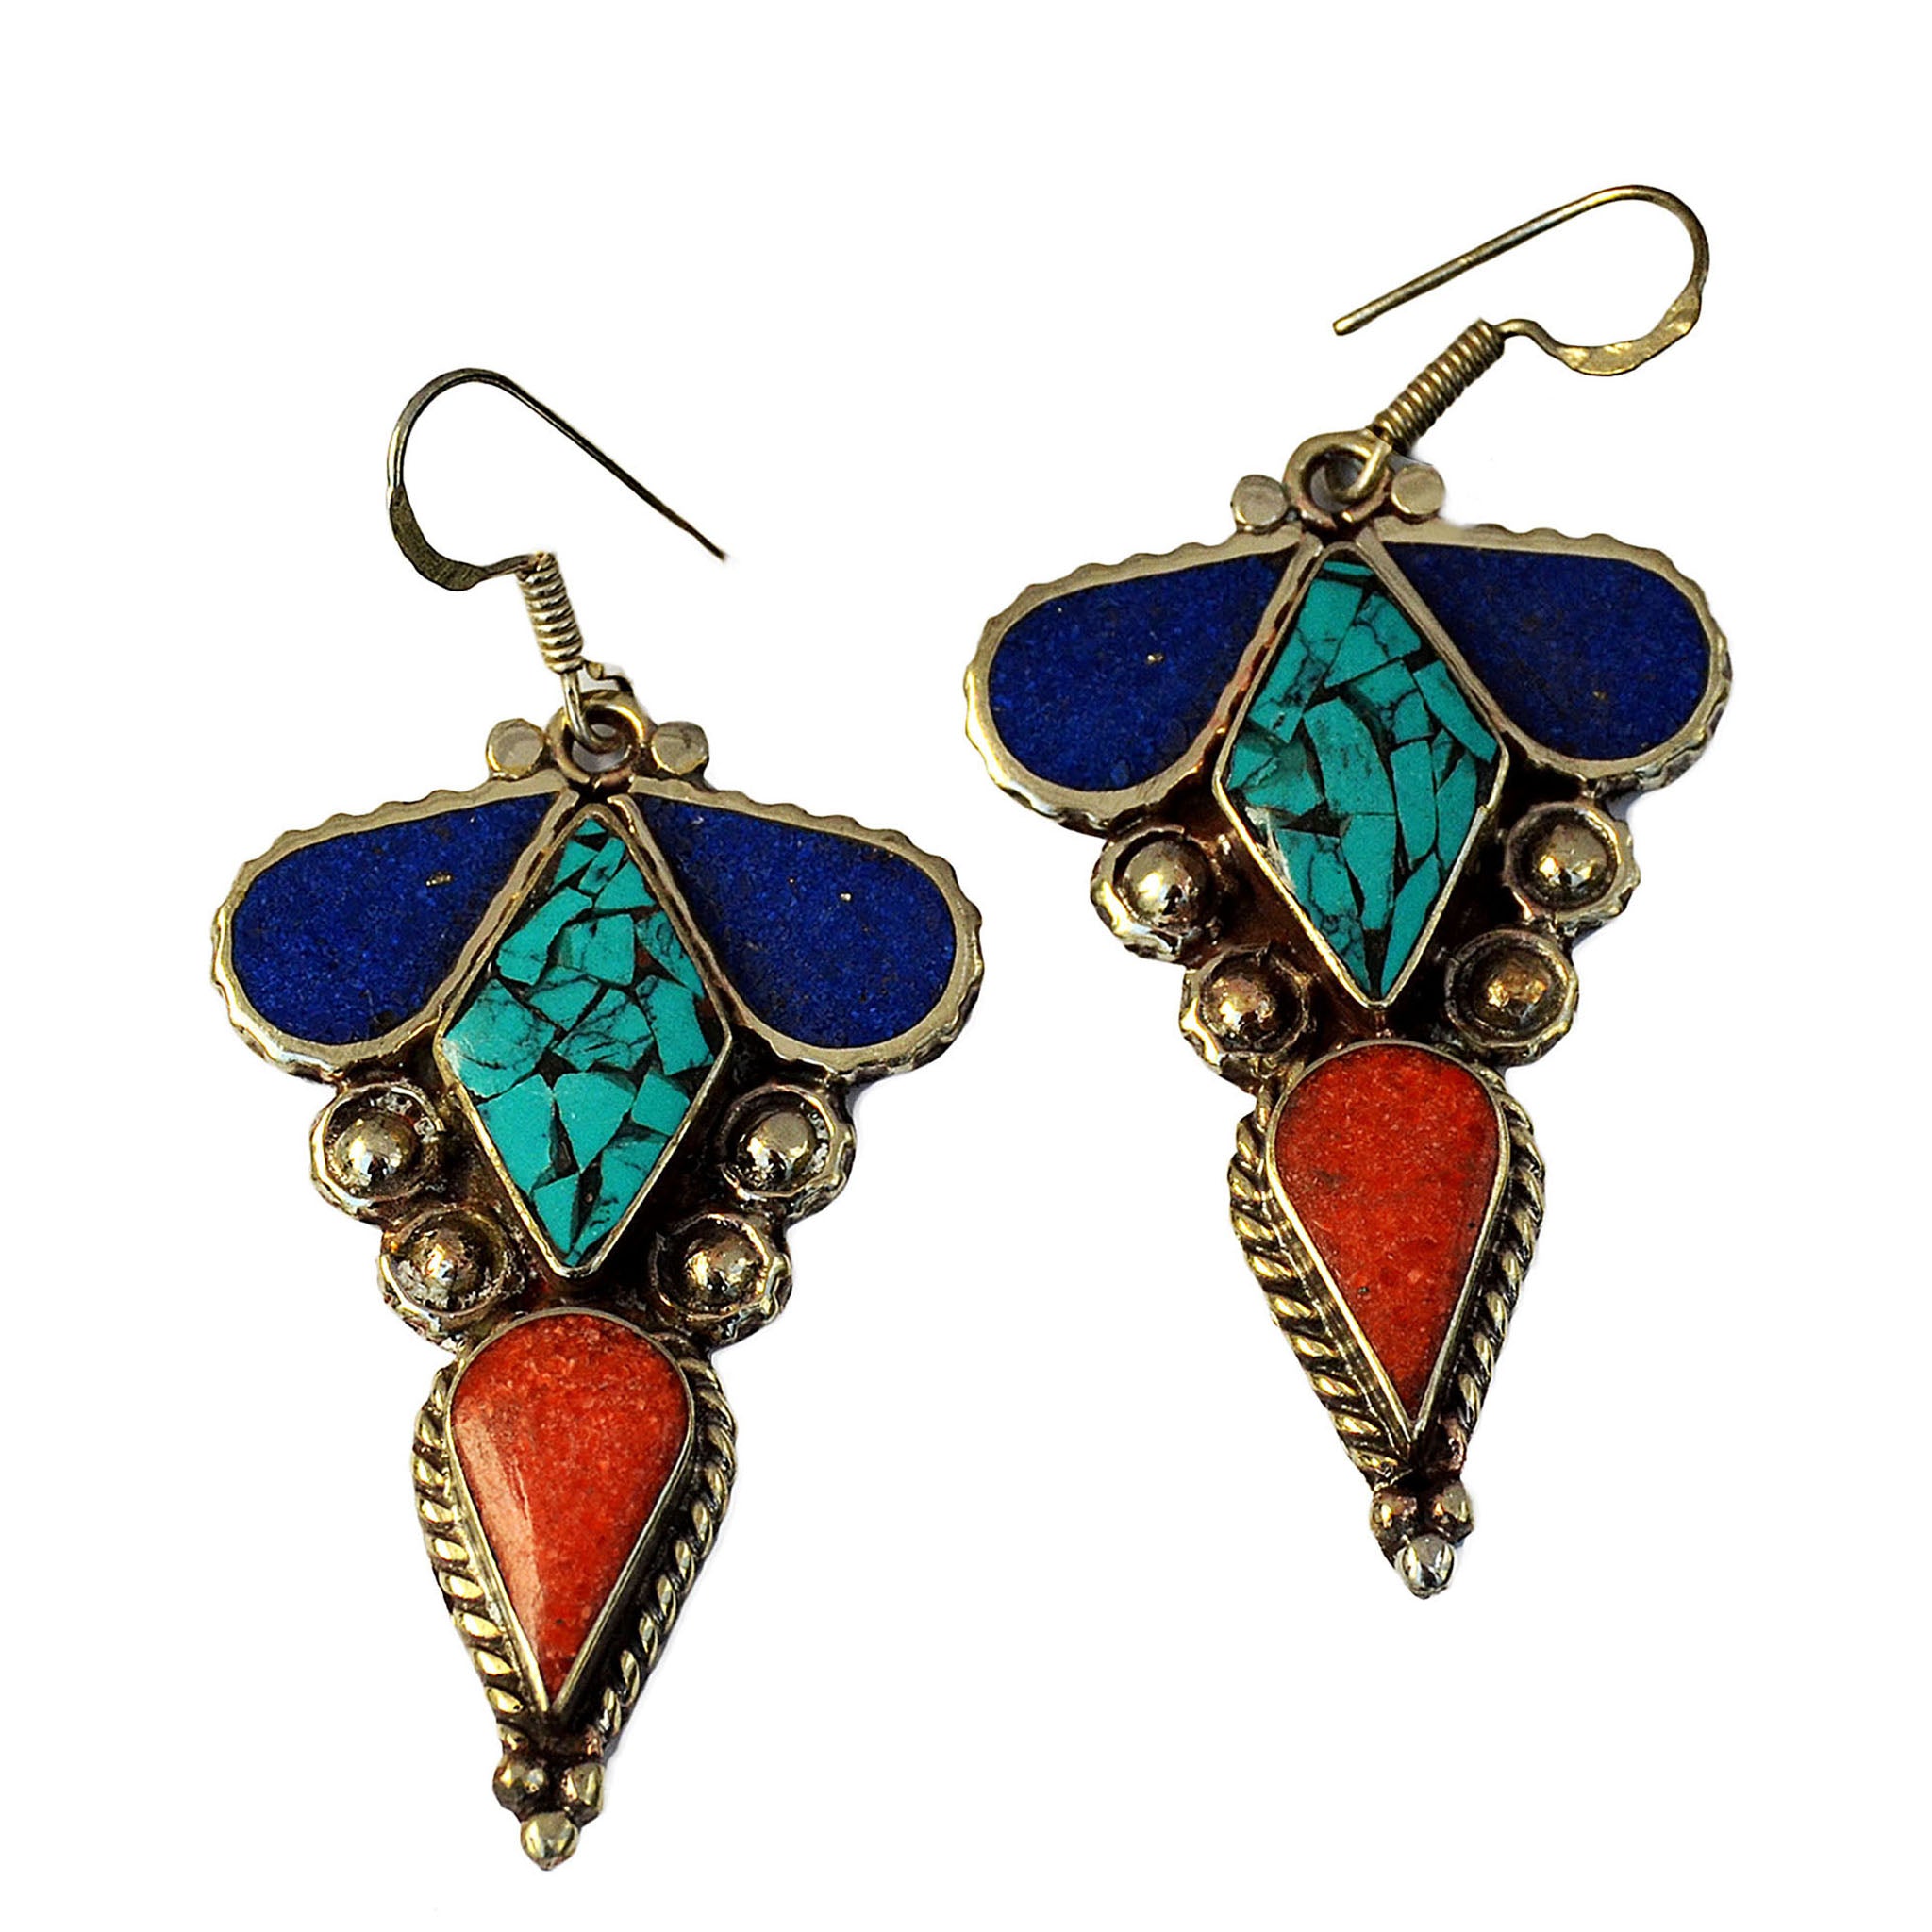 Tribal silver earrings with inlay turquoise, lapis lazuli and red coral gemstones